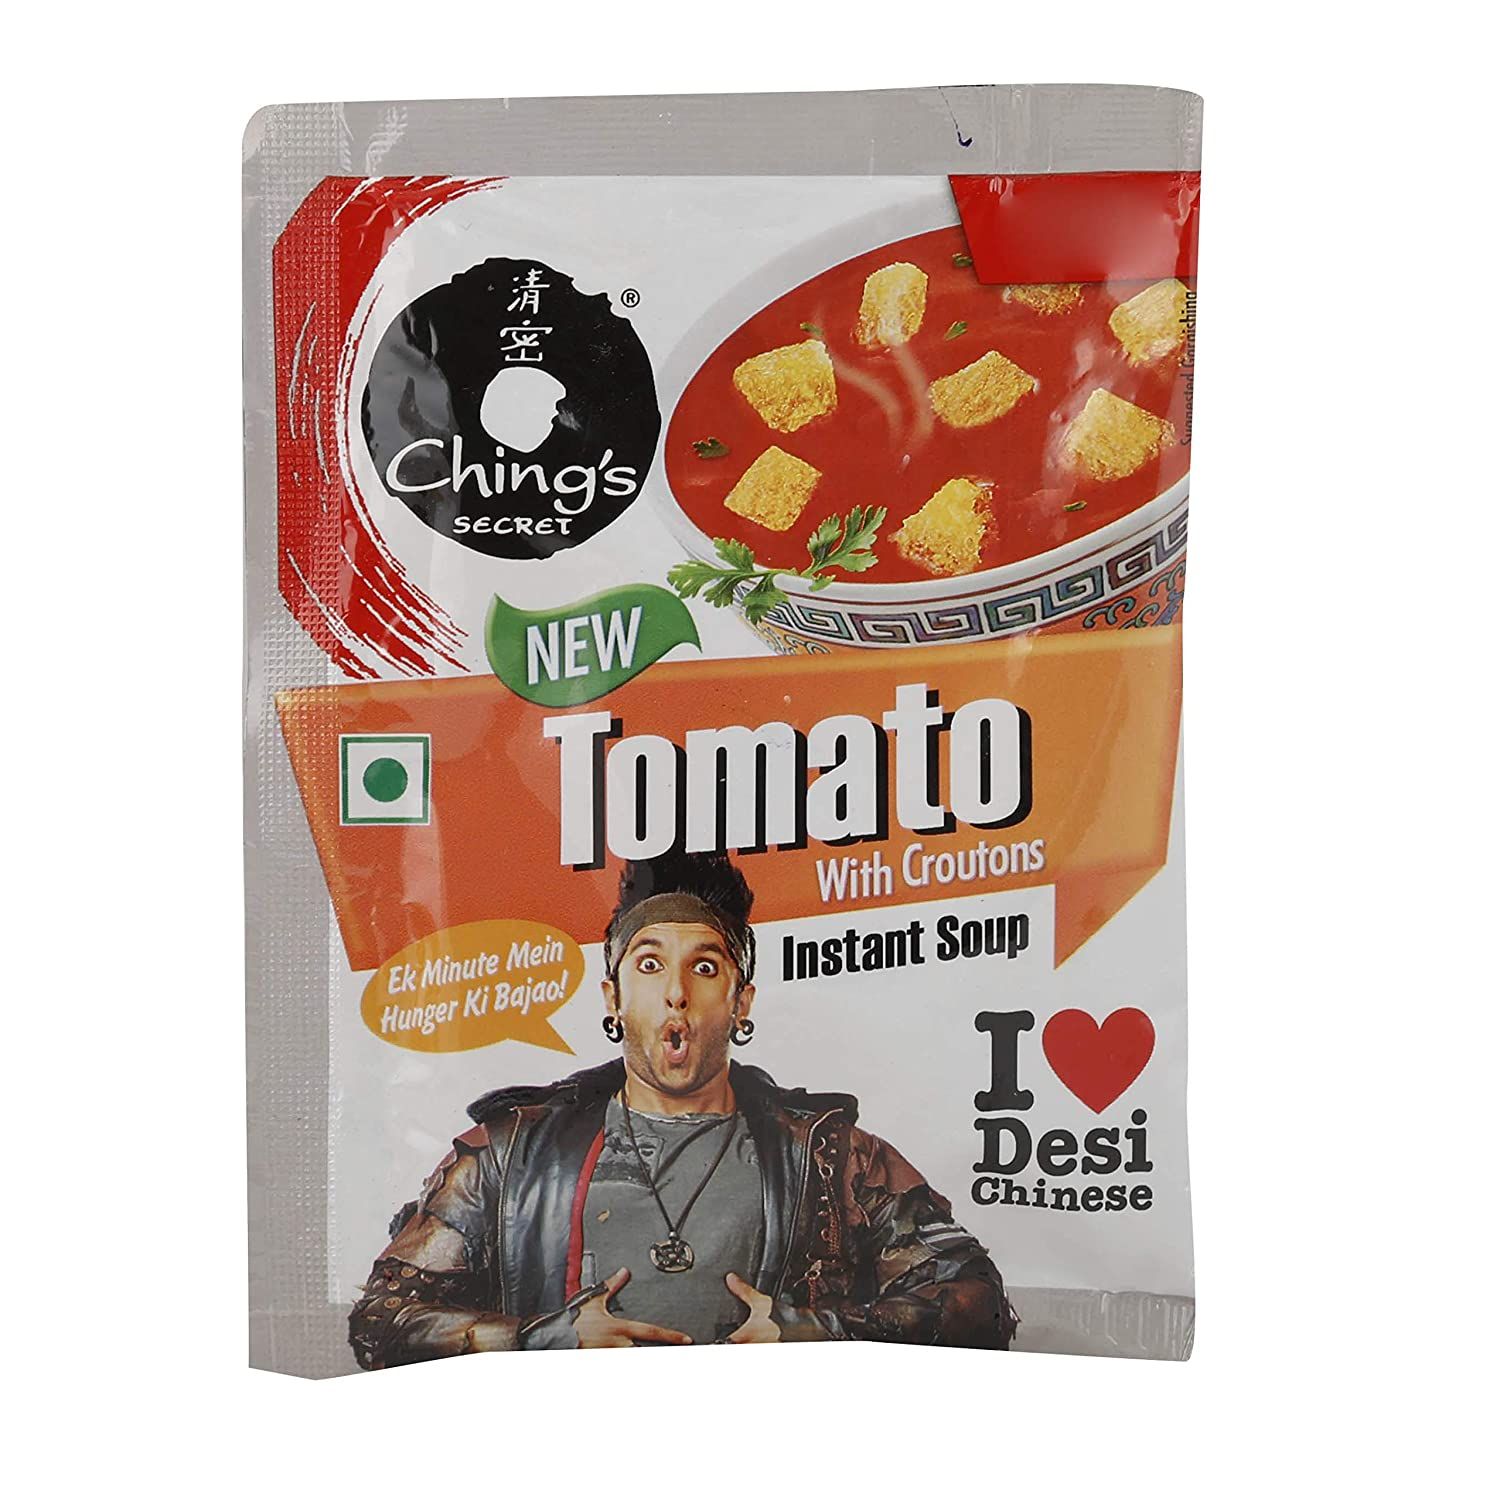 Ching's Tomato Instant Soup Image